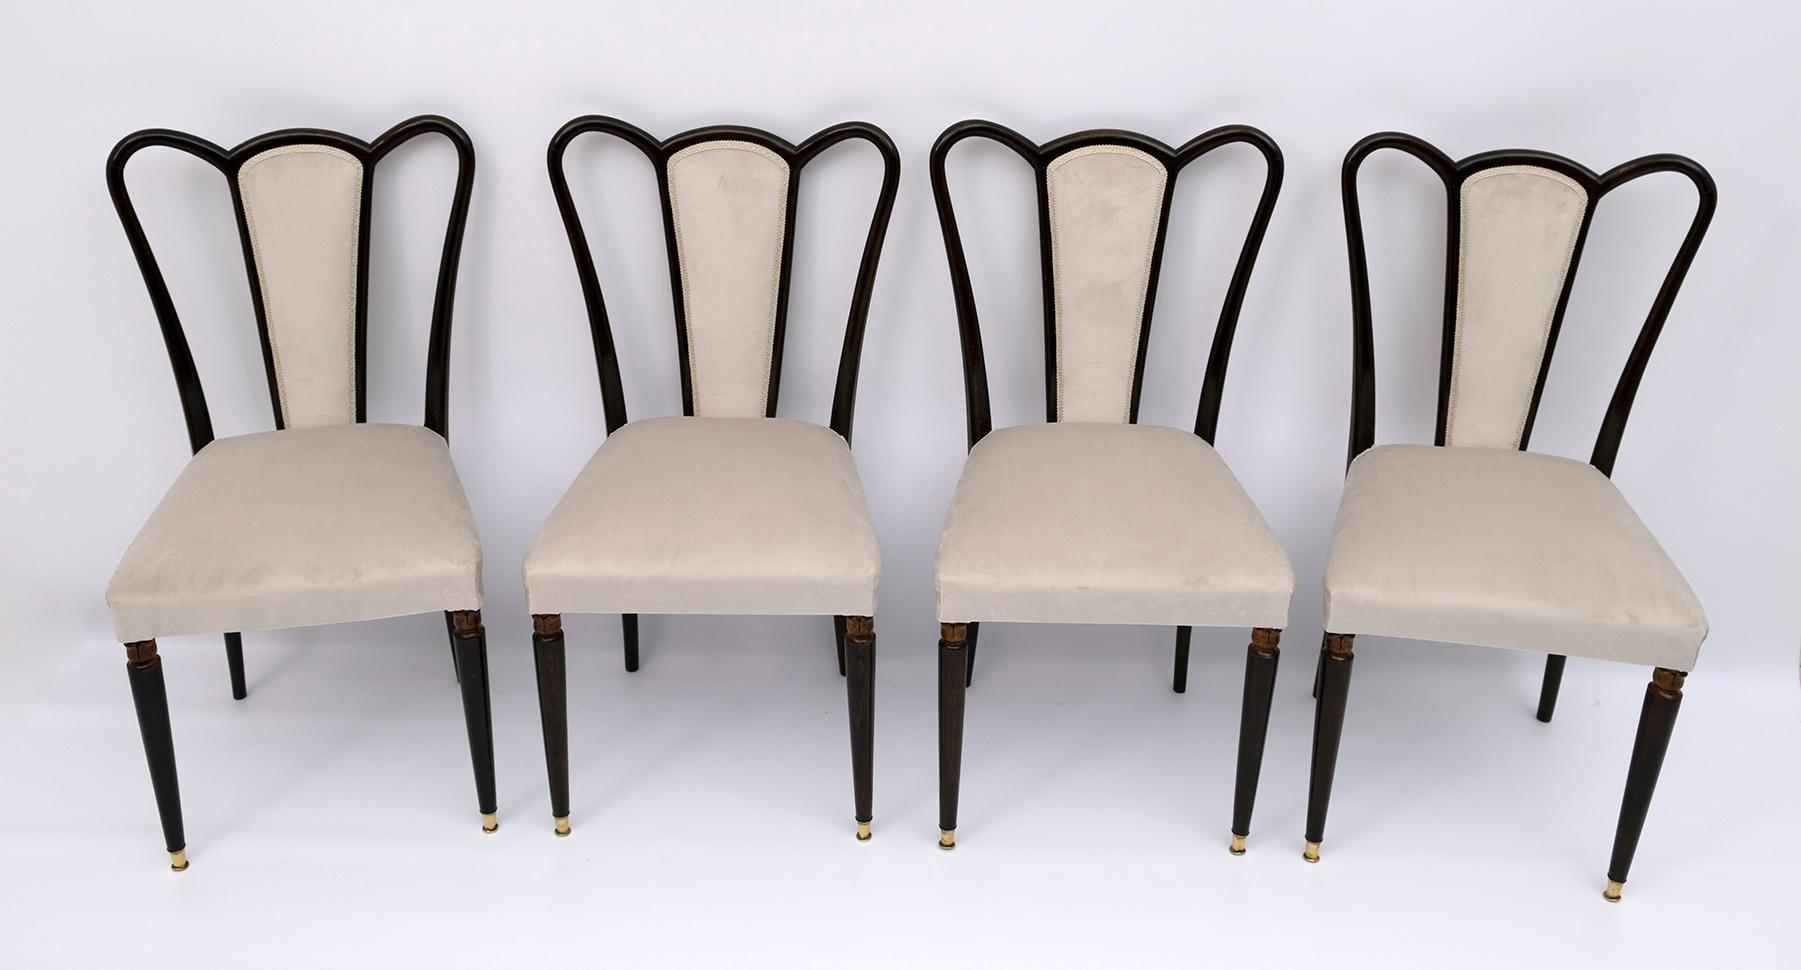 Four chairs designed by the well-known designer Guglielmo Ulrich and produced by Arredamenti Casa between the 1940s and 1950s. The chairs have been restored and upholstered in cream velvet. The chairs are in curved beech, dark walnut stained.

In